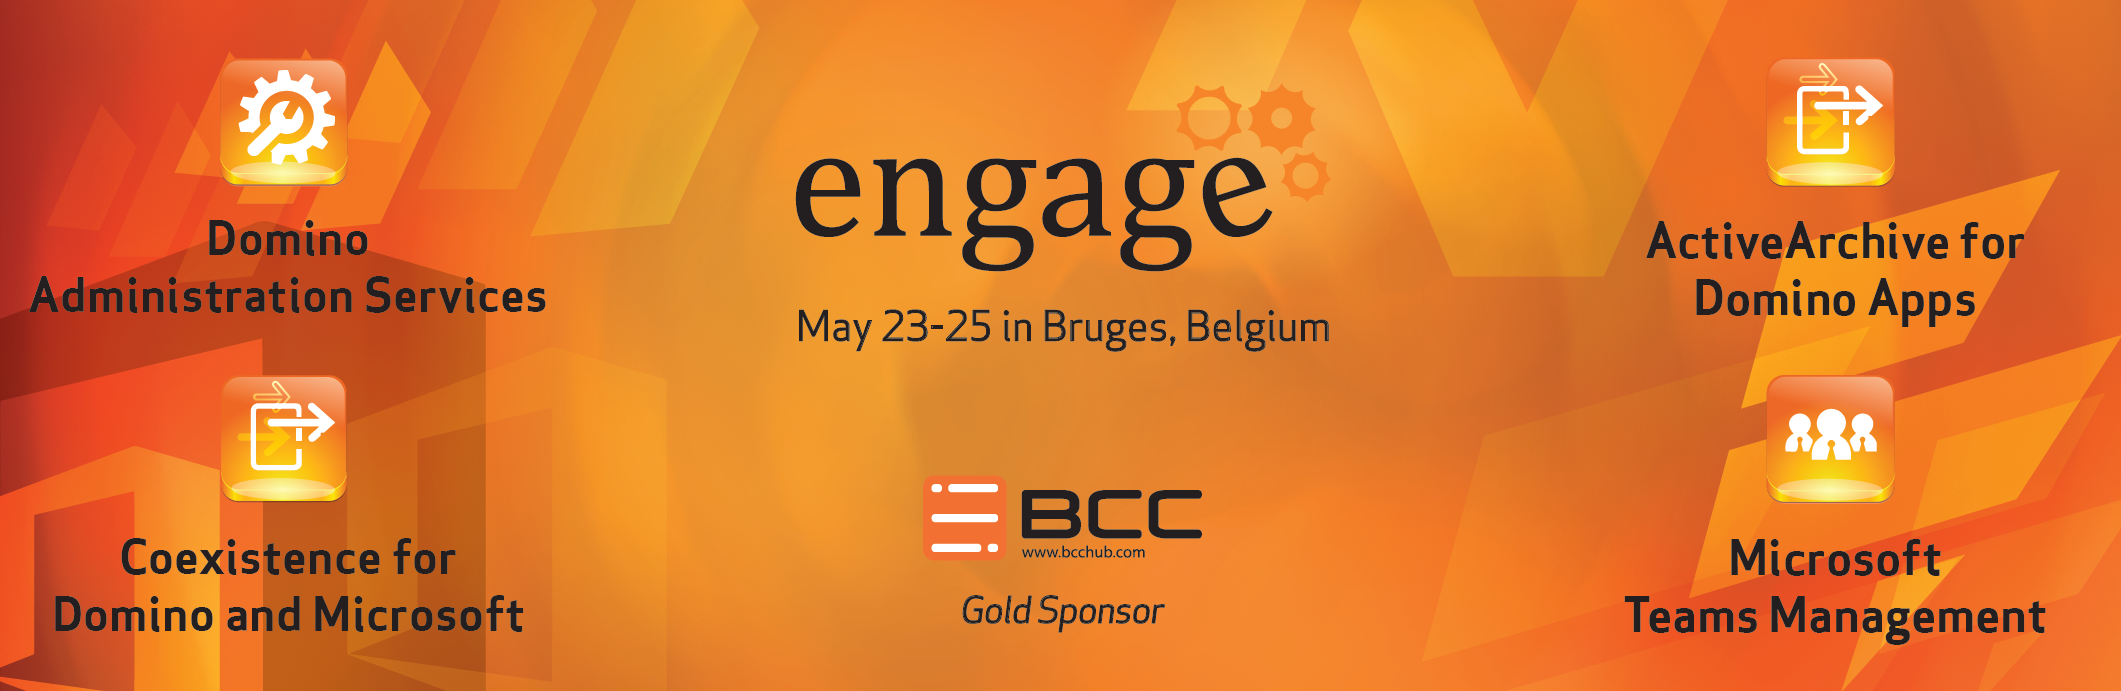 BCC presents the Integration and Coexistence of Domino & Microsoft 365 at Engage 2022